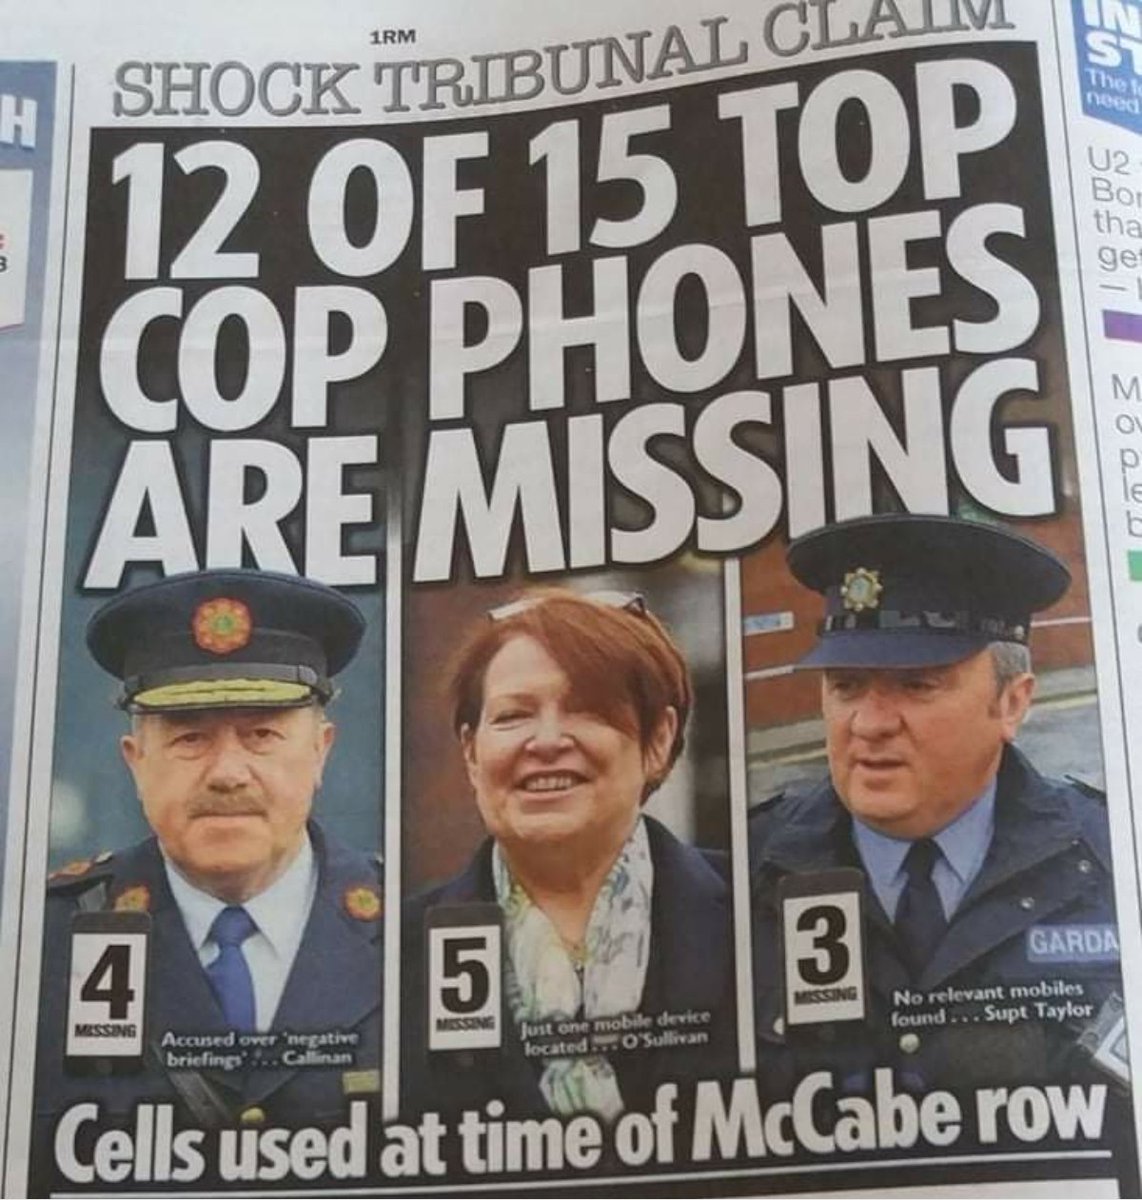 #Tubridy  The mobile phones the computer tablets and laptops of all these RTE senior executives need to be seized by the Garda Fraud squad immediately before they dissappear like those of Noirin O Sullivan and the rest of Garda top brass . #RTE #LIVELINE #TODAYCB #RTEDRIVETIME